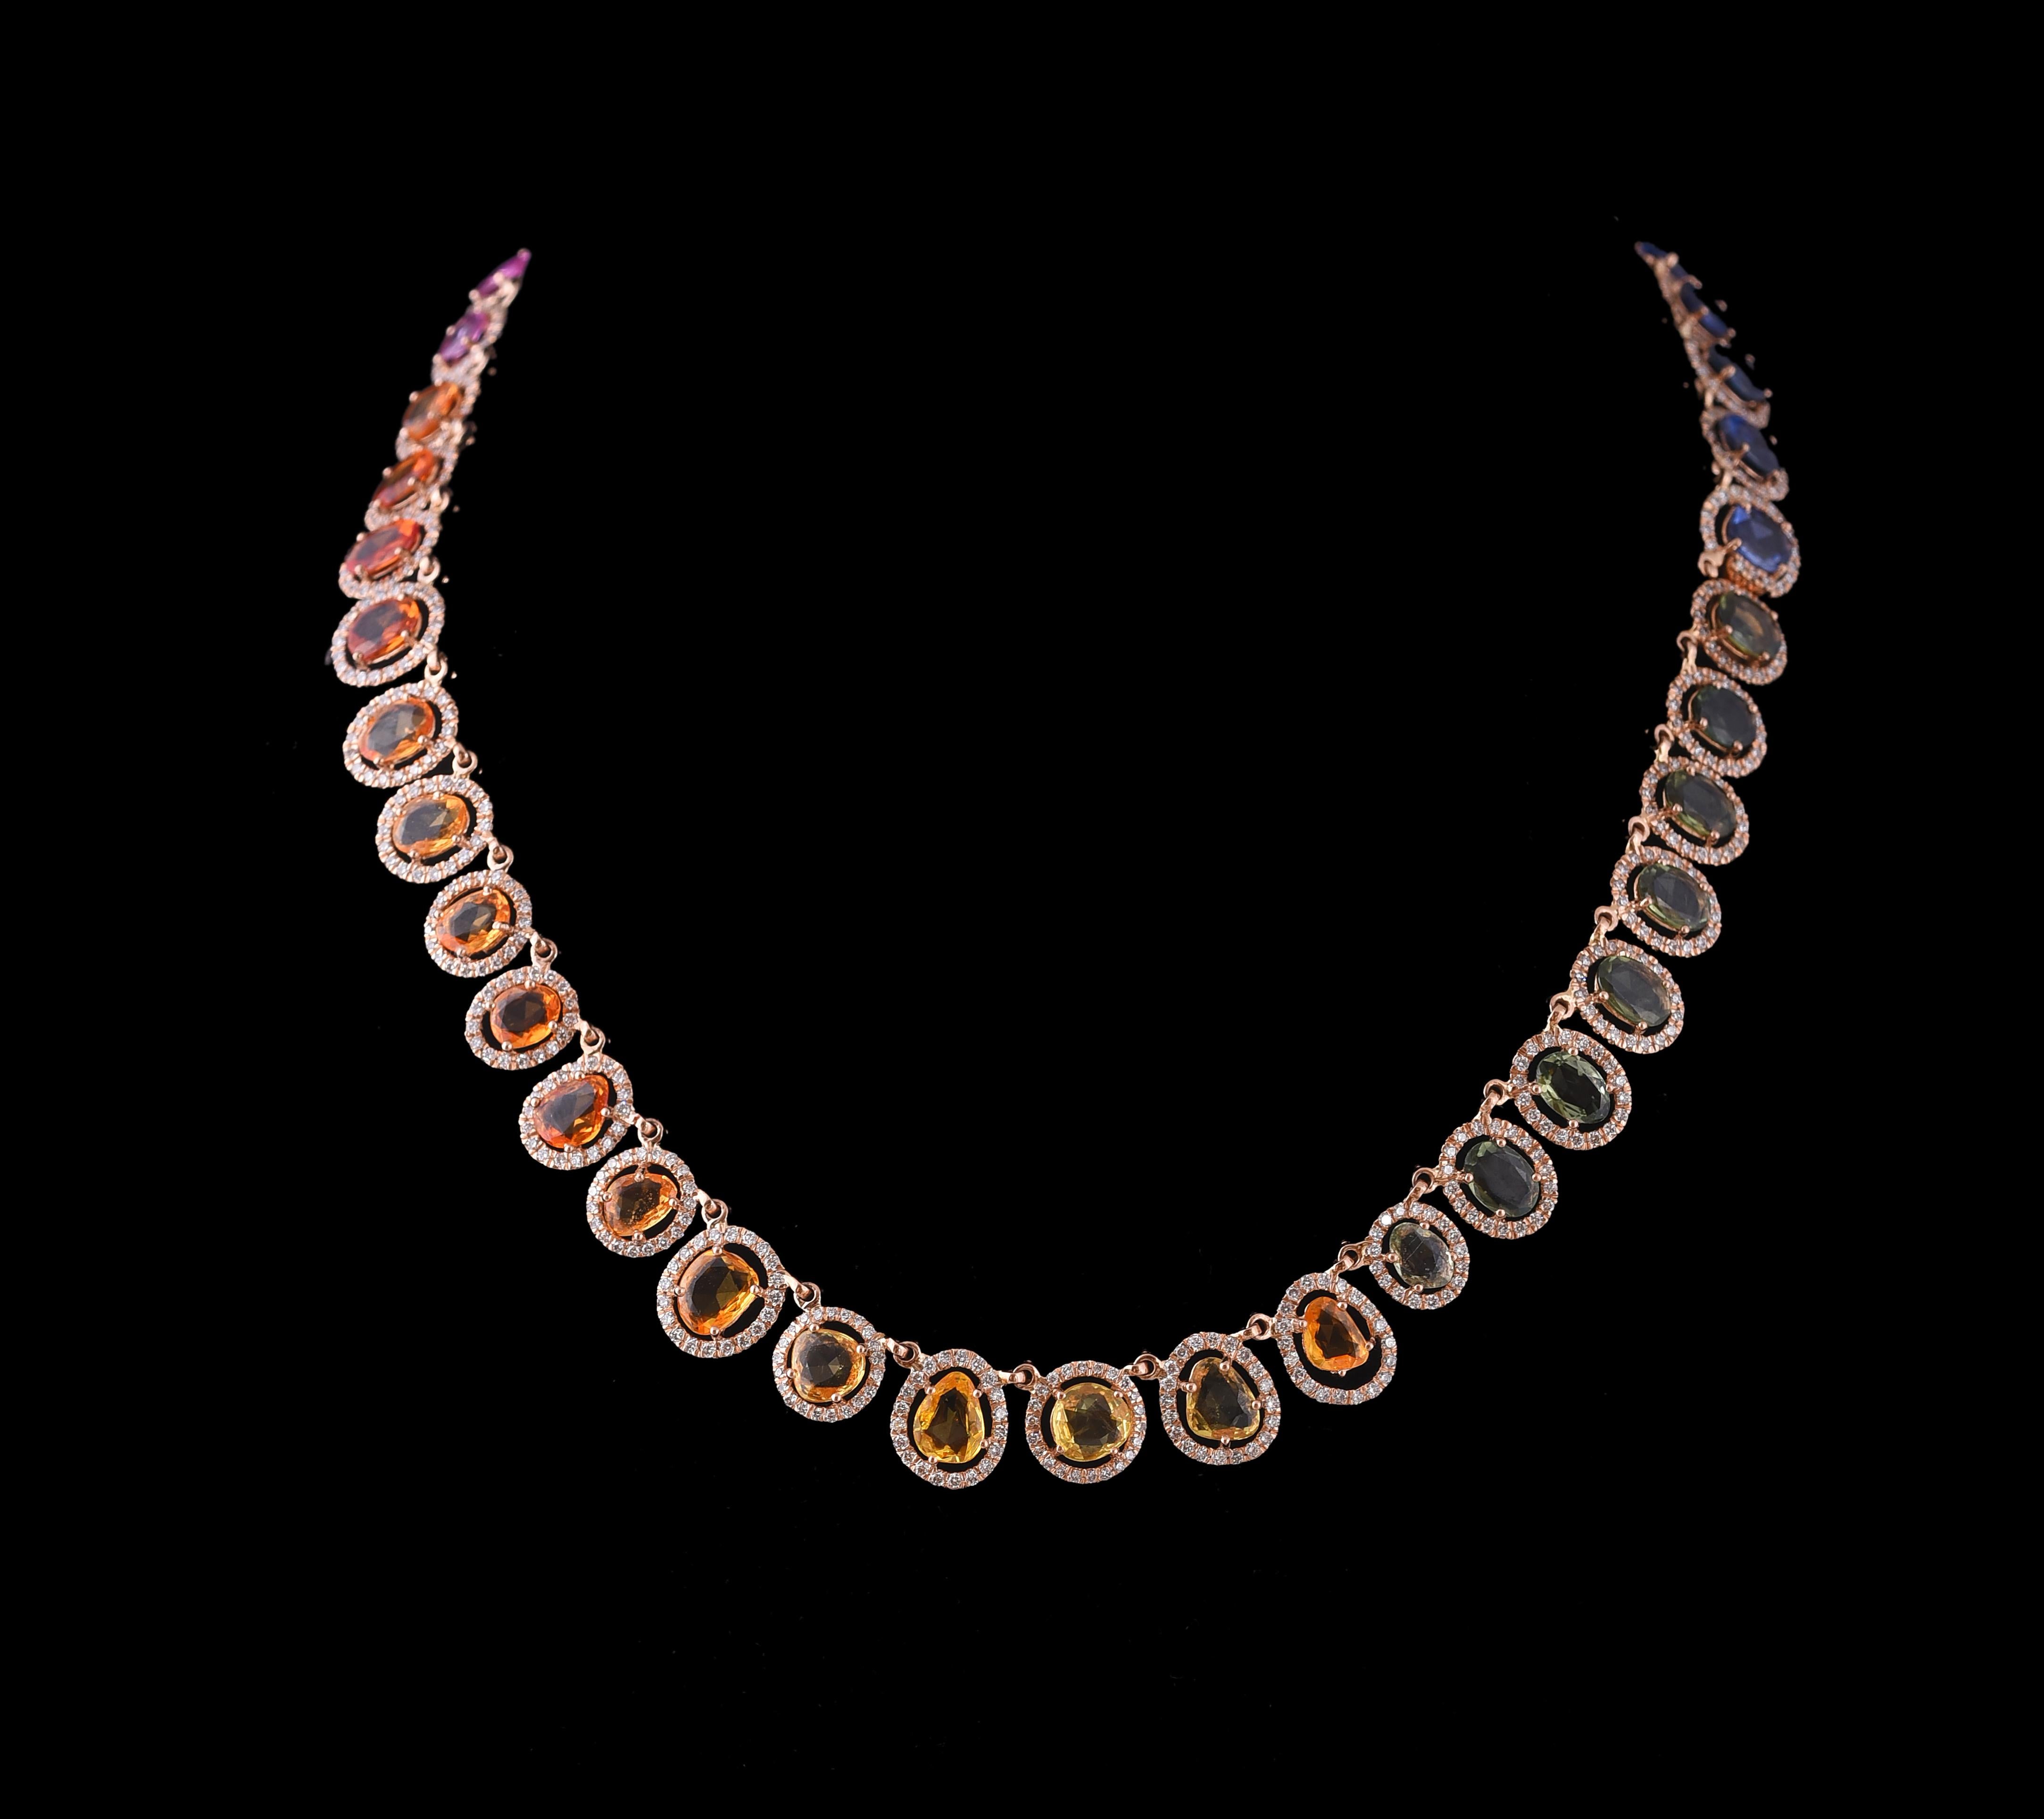 A very simple yet gorgeous Multi Sapphire necklace set in 18K Gold and Diamonds. The colours of the Multi- Sapphires include Blue, Green, Grey, Pink, Orange and Yellow. All the sapphires are natural and without any treatment. Because the necklace